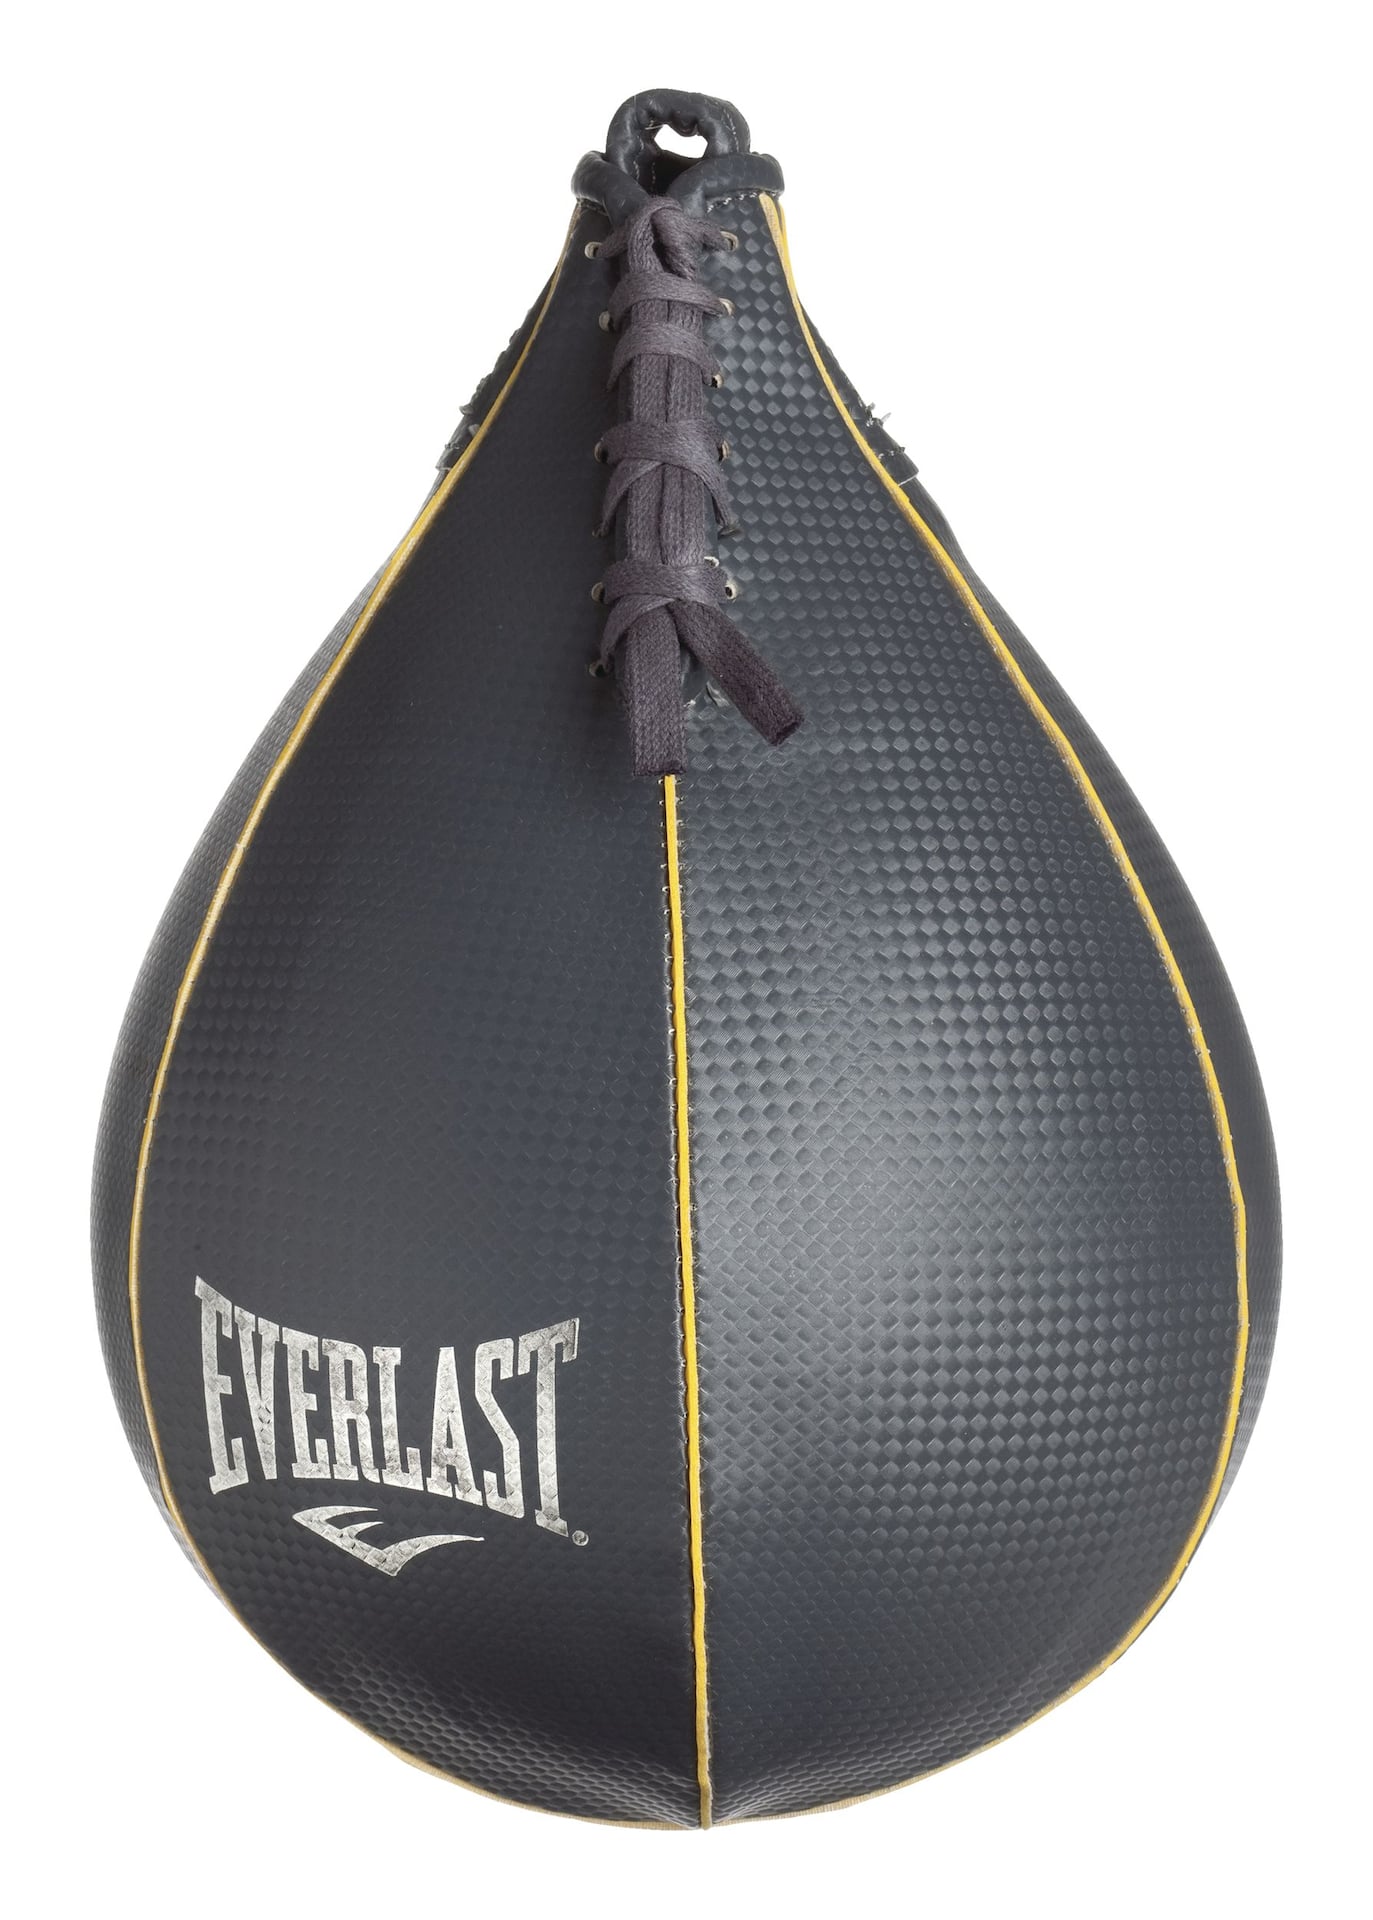 https://media-www.canadiantire.ca/product/playing/exercise/exercise-accessories/1840502/everlast-speed-bag-eb01e92c-a894-4a66-8347-9244ad93ef4c-jpgrendition.jpg